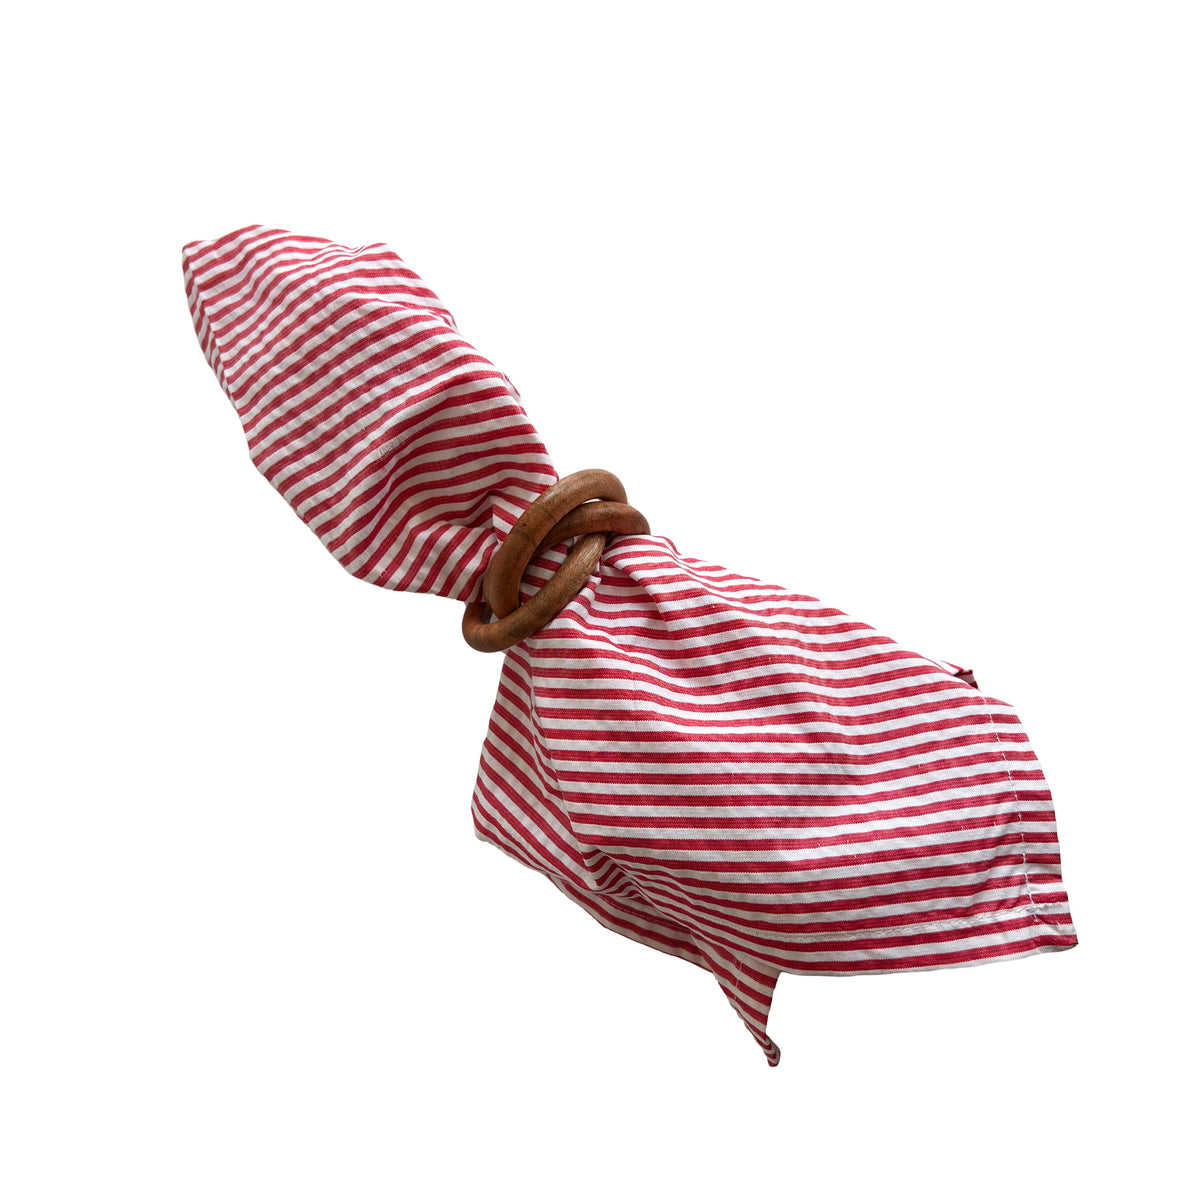 Seersucker Napkin in red and white stripes in a Bangle wooden napkin ring from Caskata